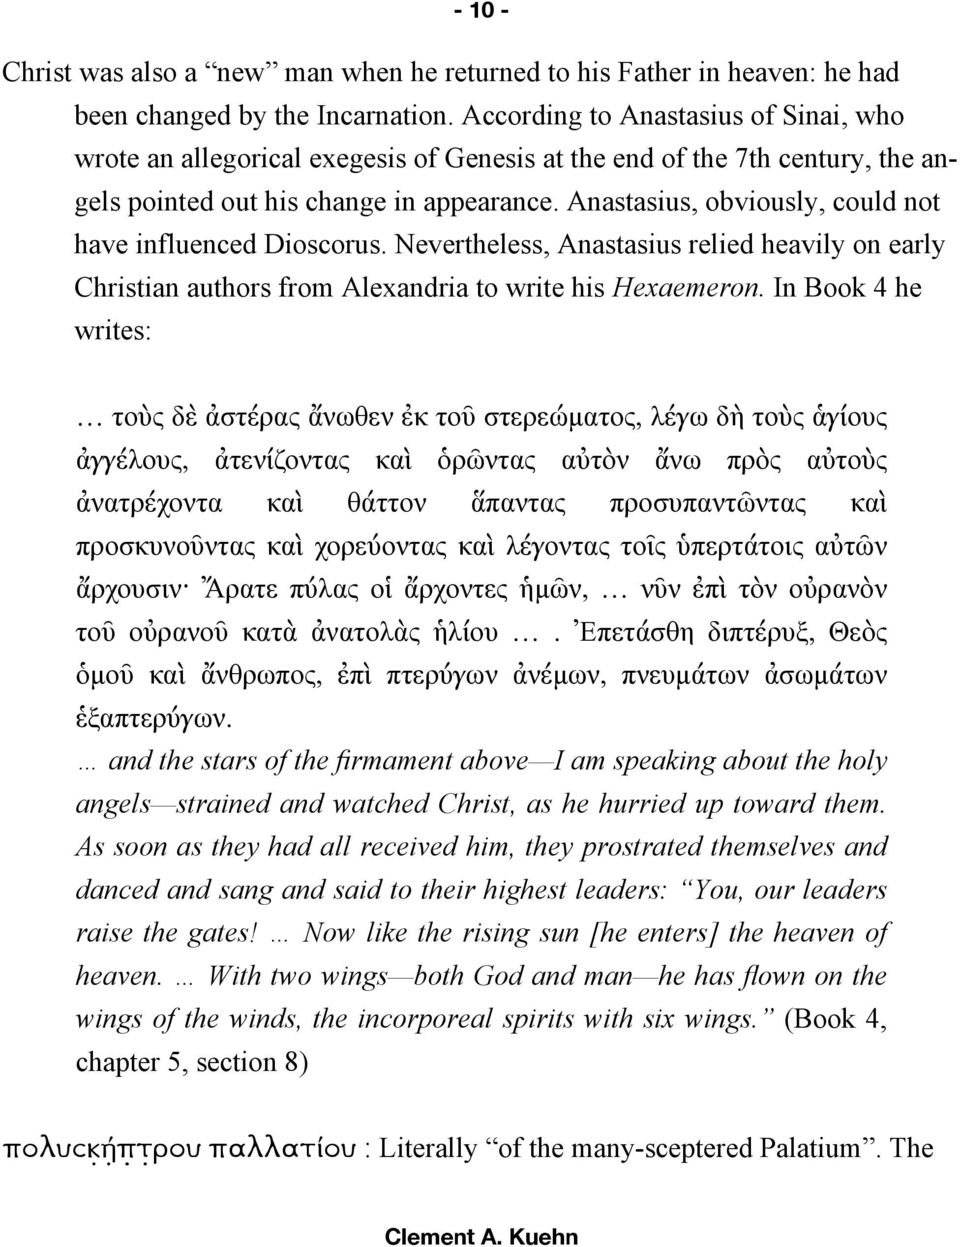 Anastasius, obviously, could not have influenced Dioscorus. Nevertheless, Anastasius relied heavily on early Christian authors from Alexandria to write his Hexaemeron.